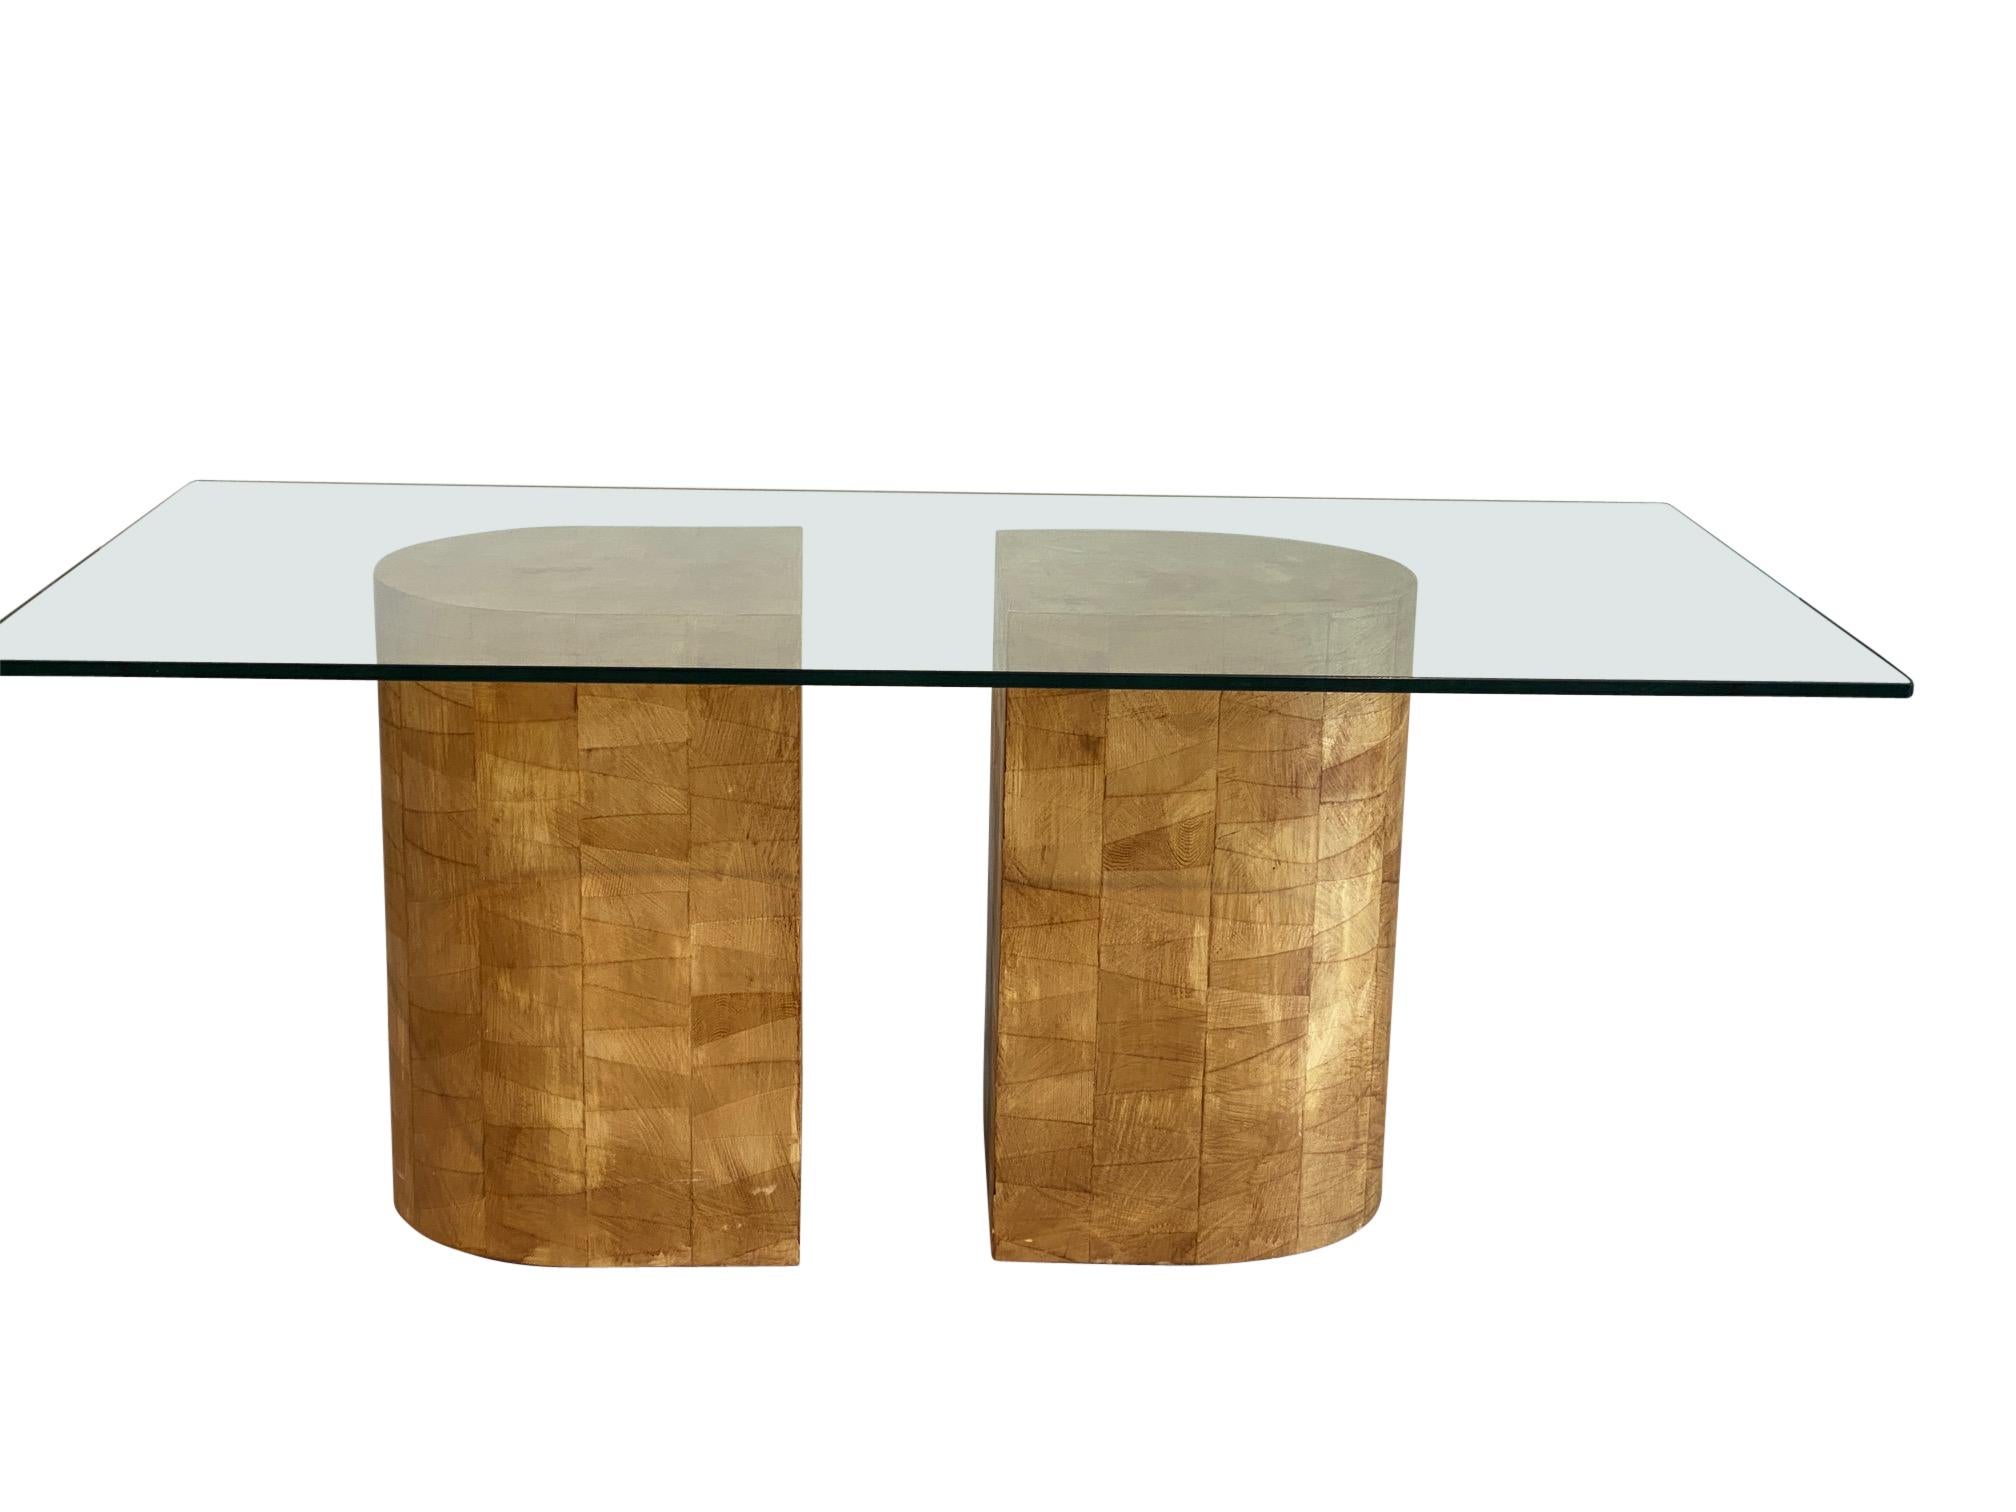 Two-piece solid wooden blocks dining table.